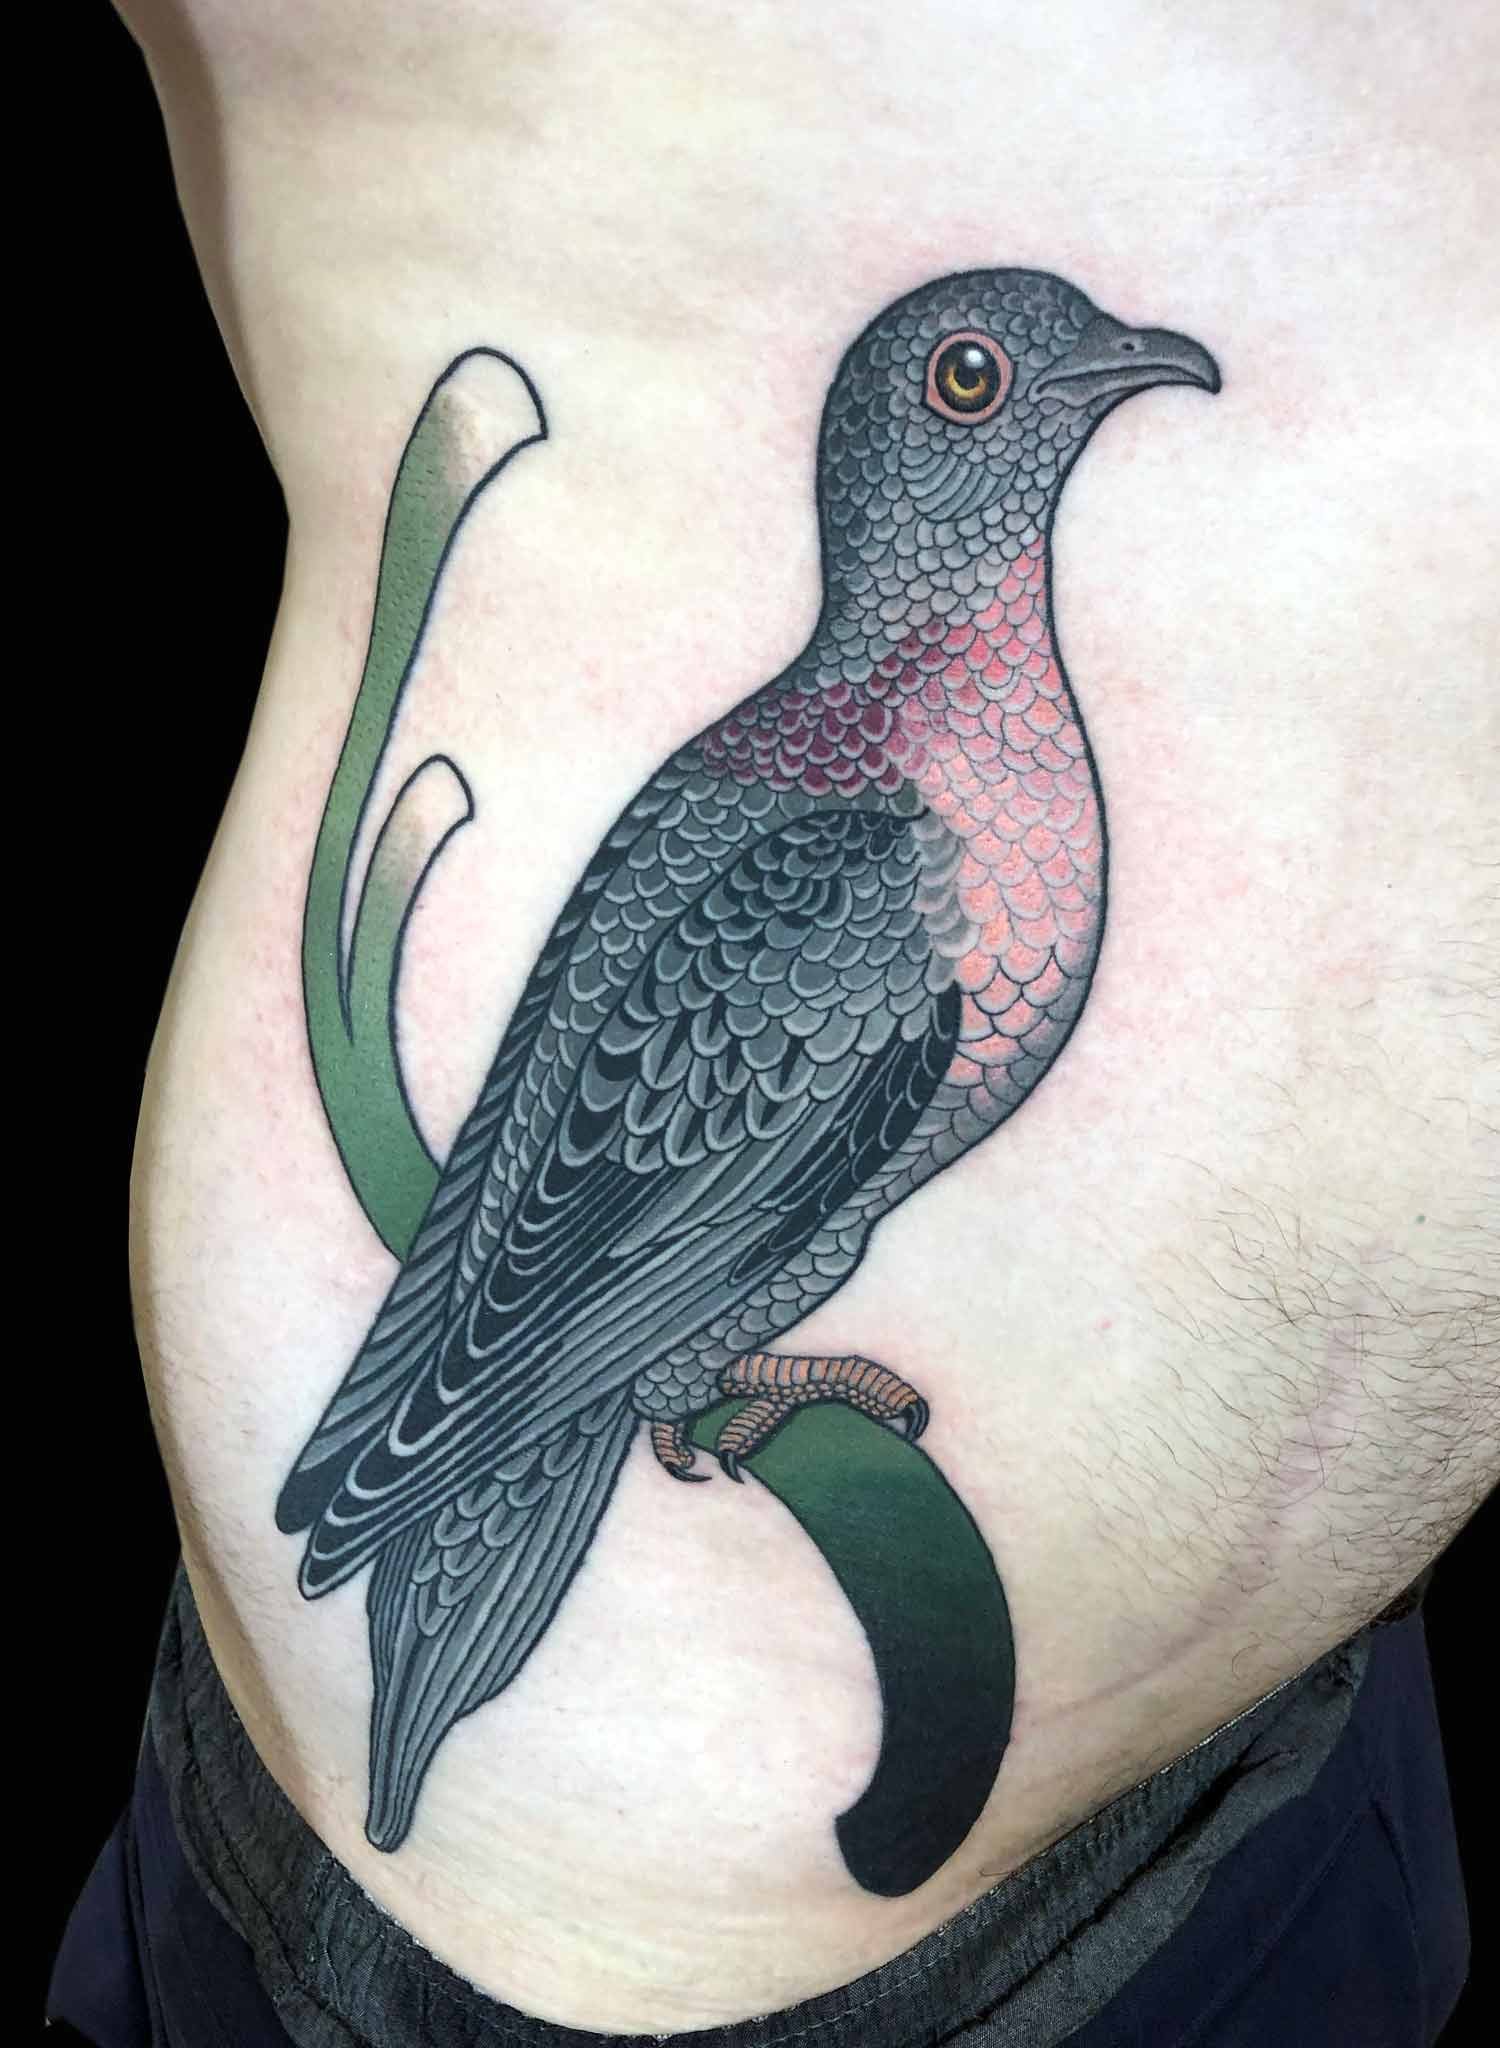 Lexica - New school pigeon tattoo design! dream tattoo of a common nyc  street pigeon, stylized